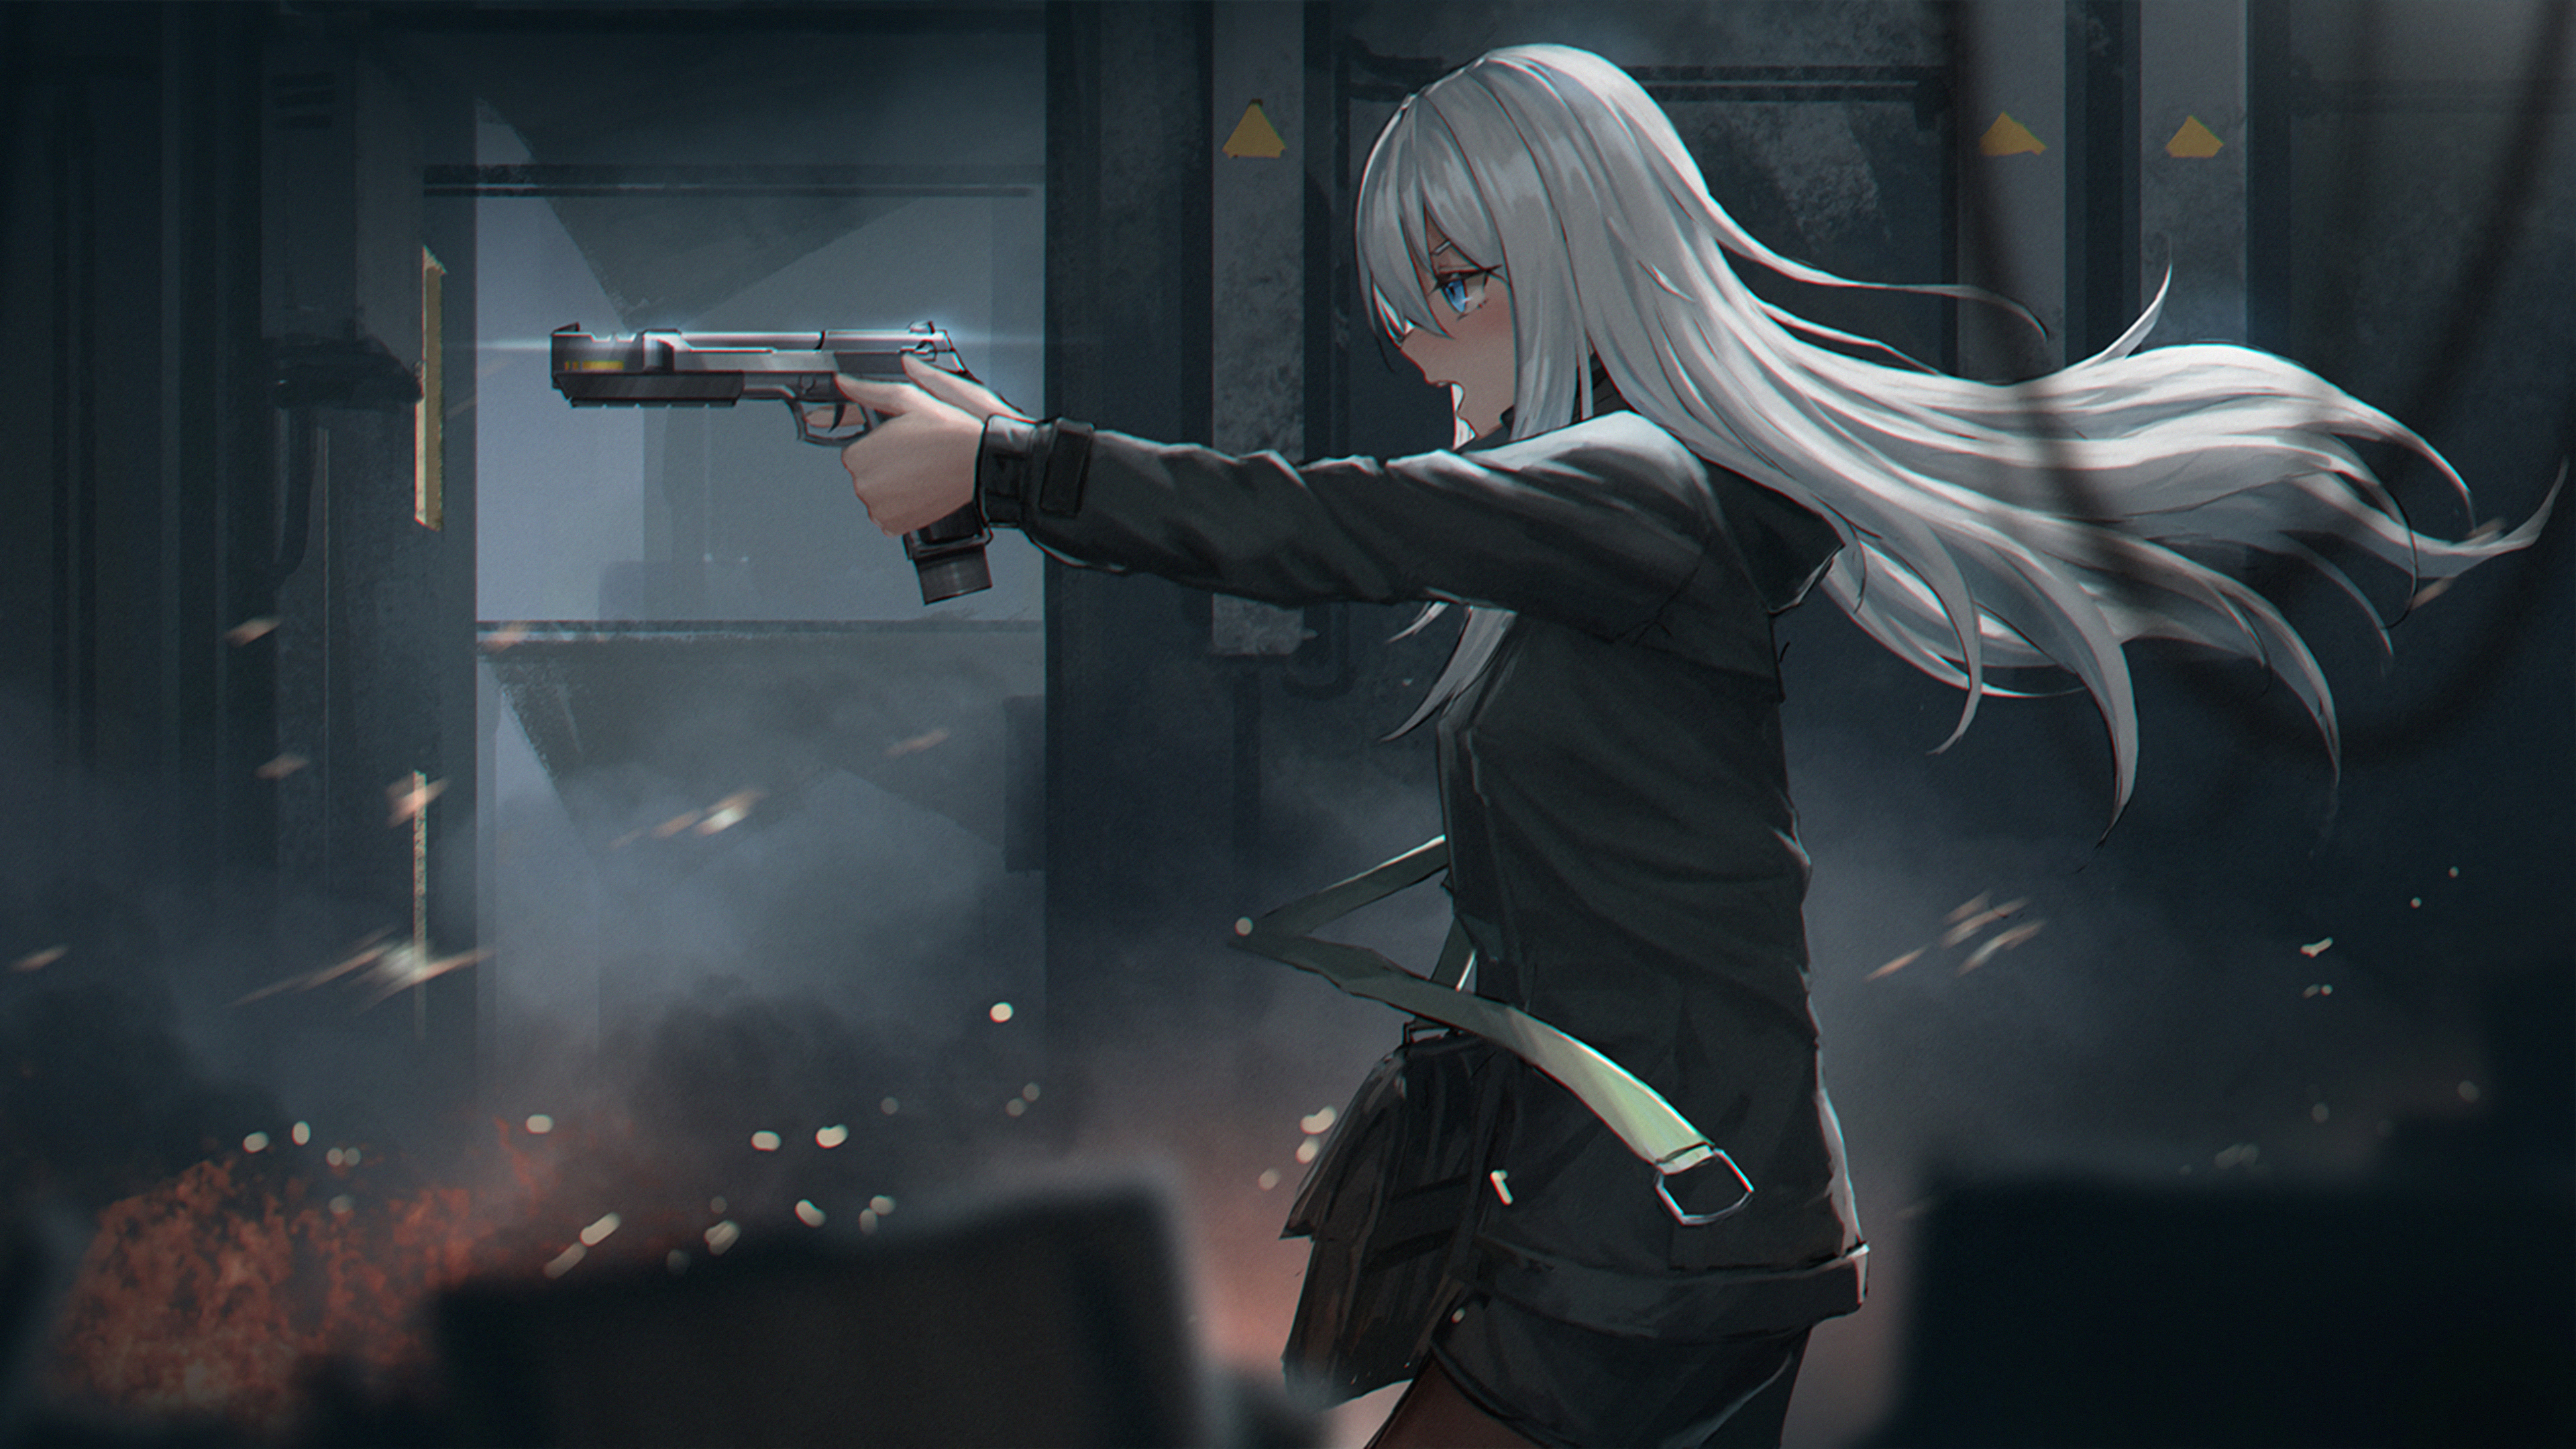 cute anime girl with a shotgun holding a demon up by the neck, HD, anime  style : r/bluewillow